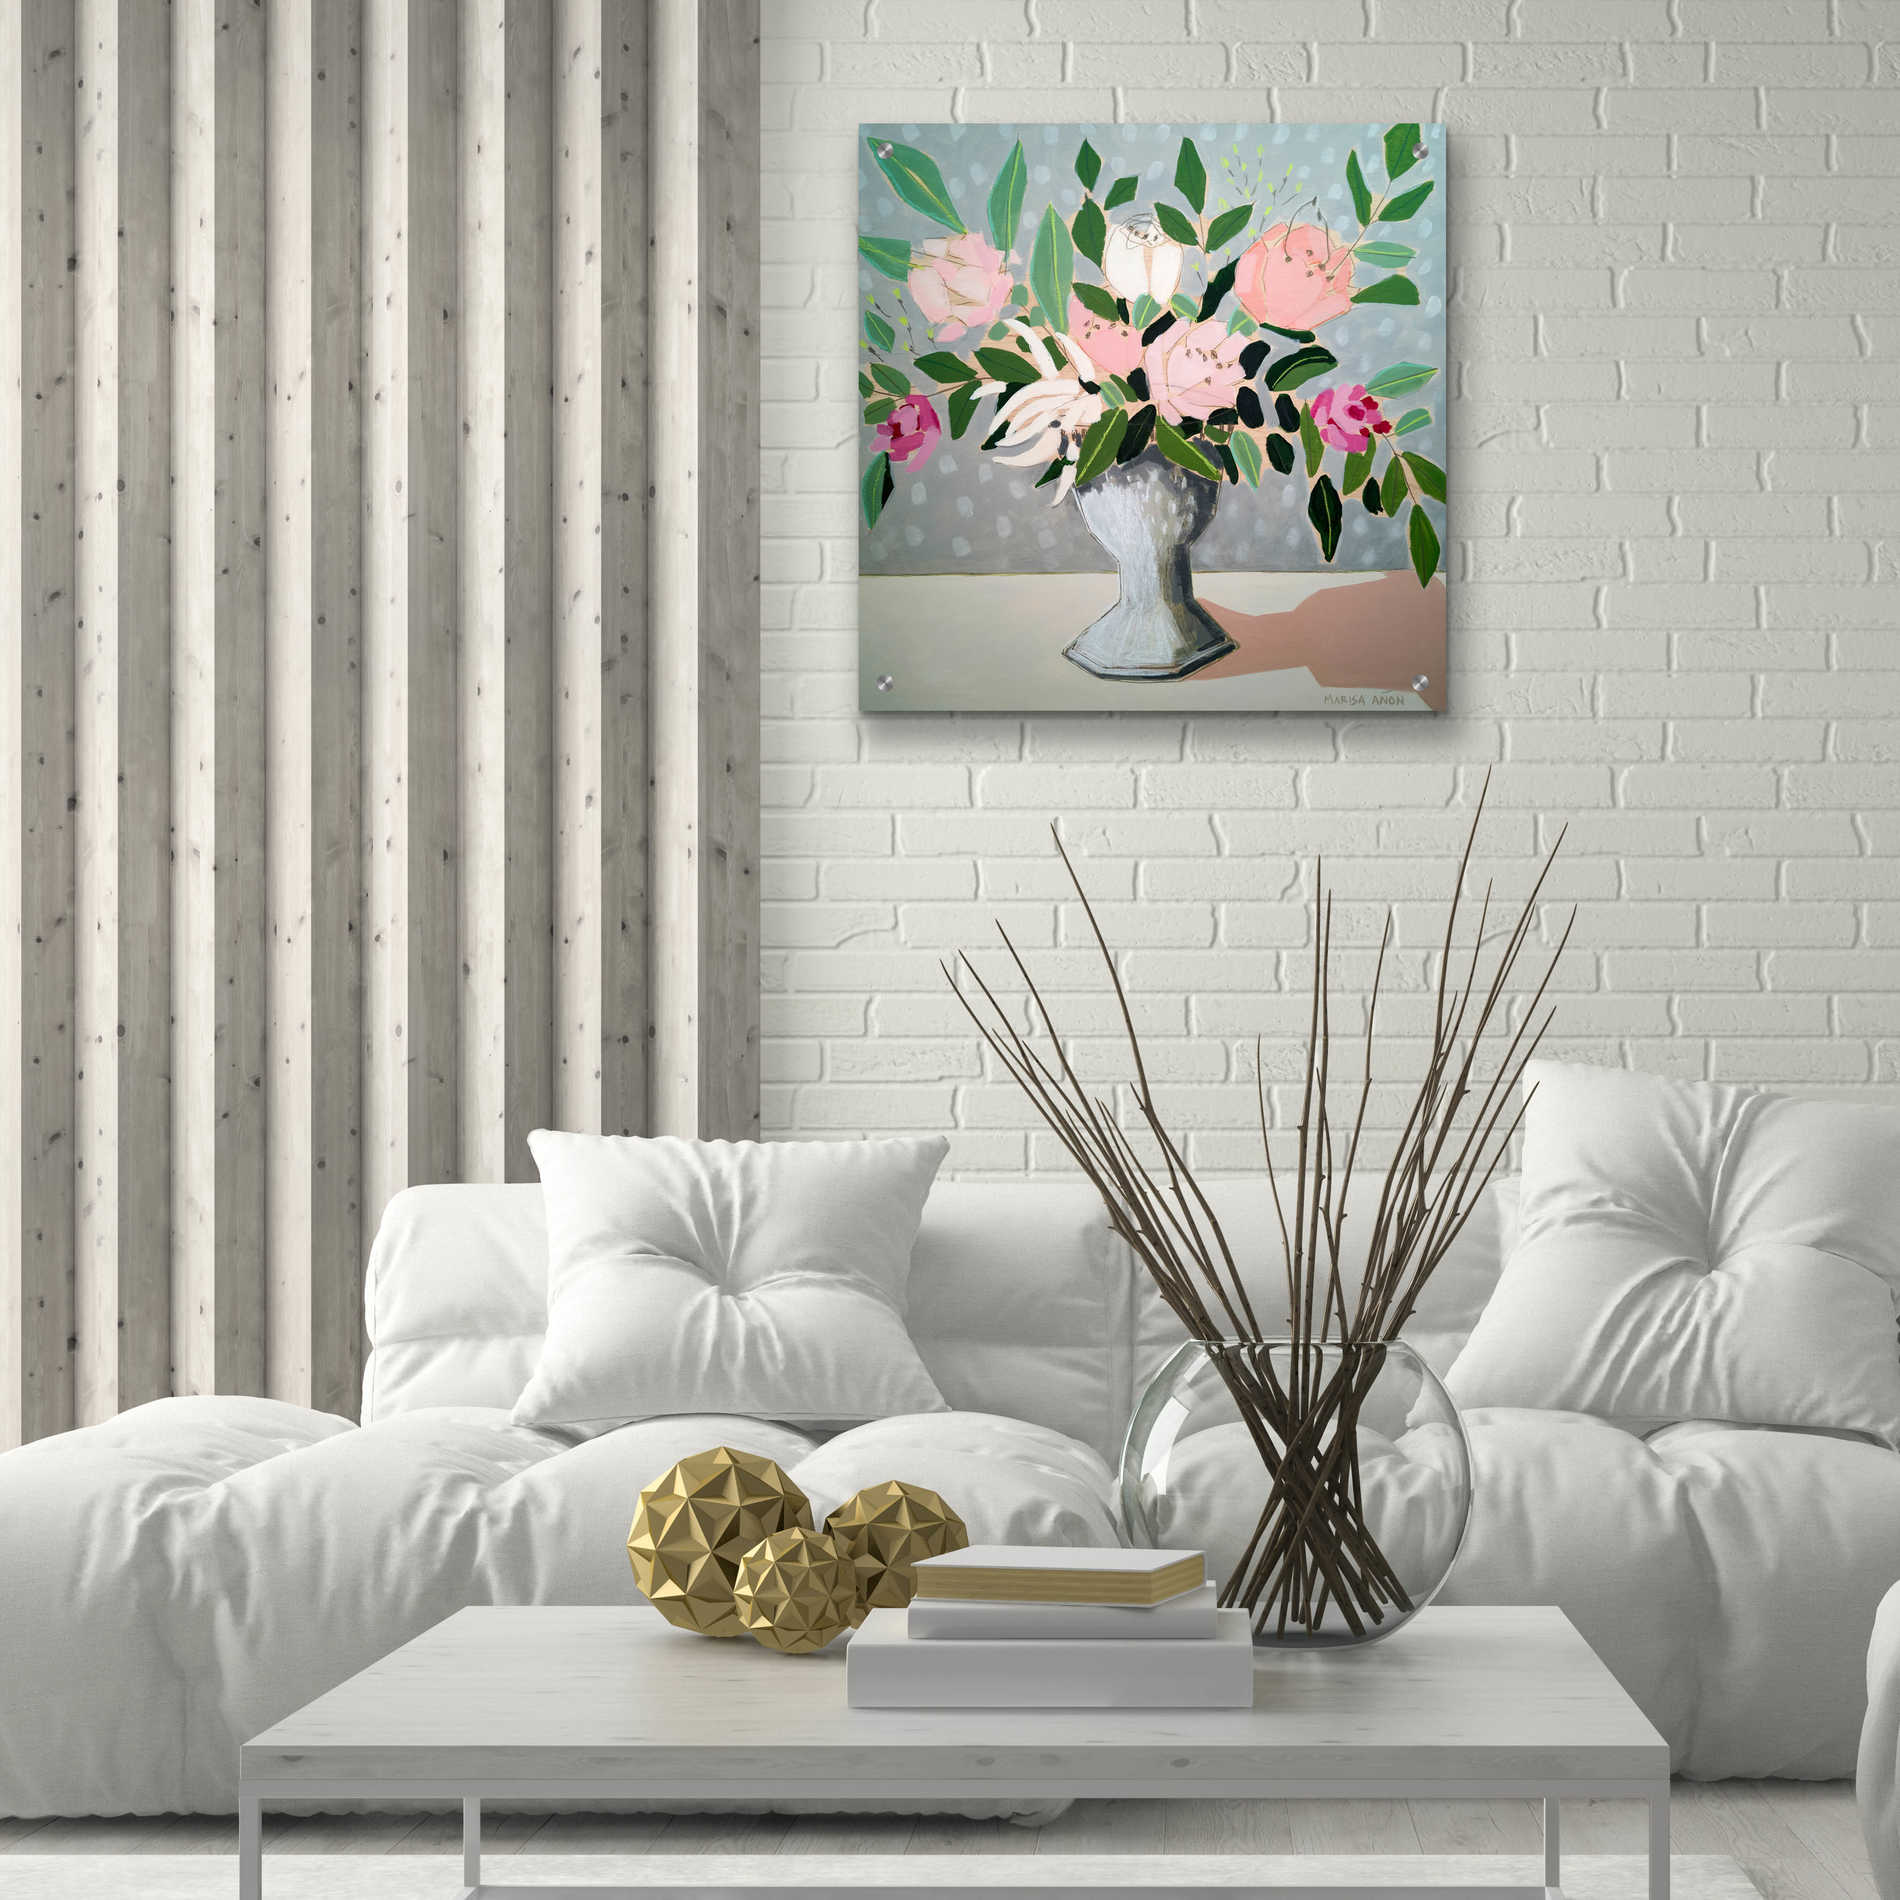 Epic Art 'Spring Florals 1' by Marisa Anon, Acrylic Glass Wall Art,24x24